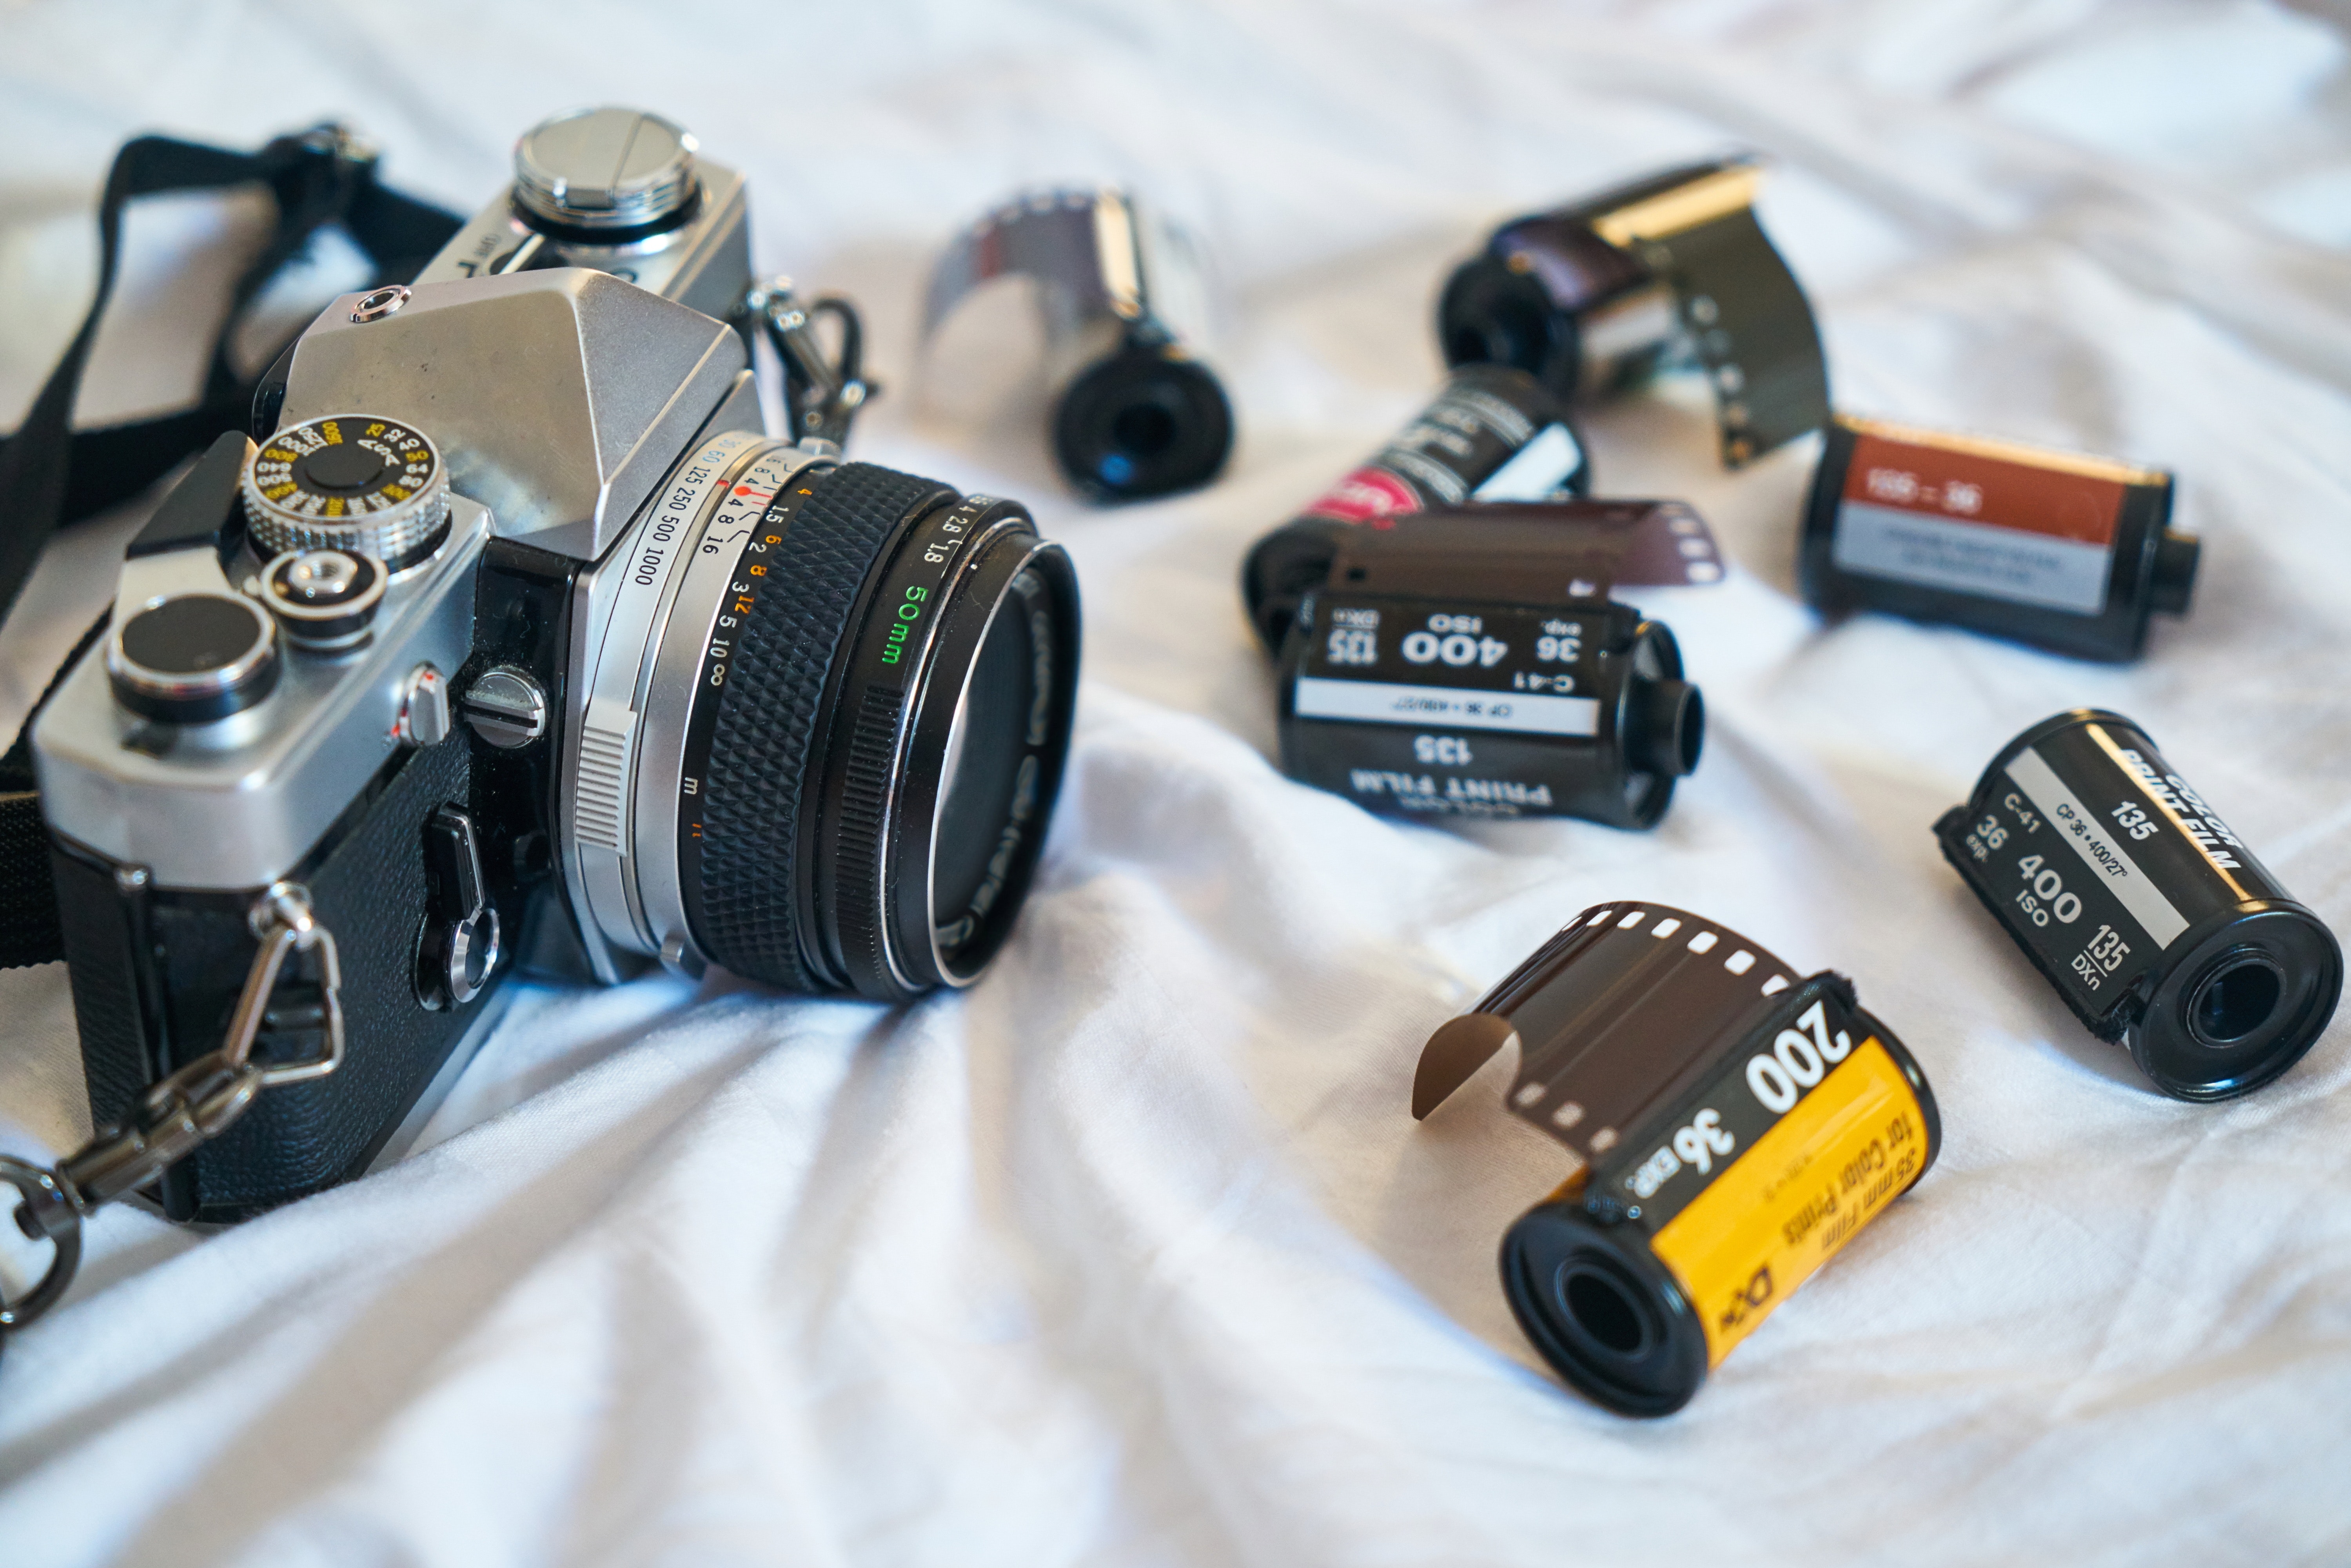 Analogue SLR Camera with 35 mm films